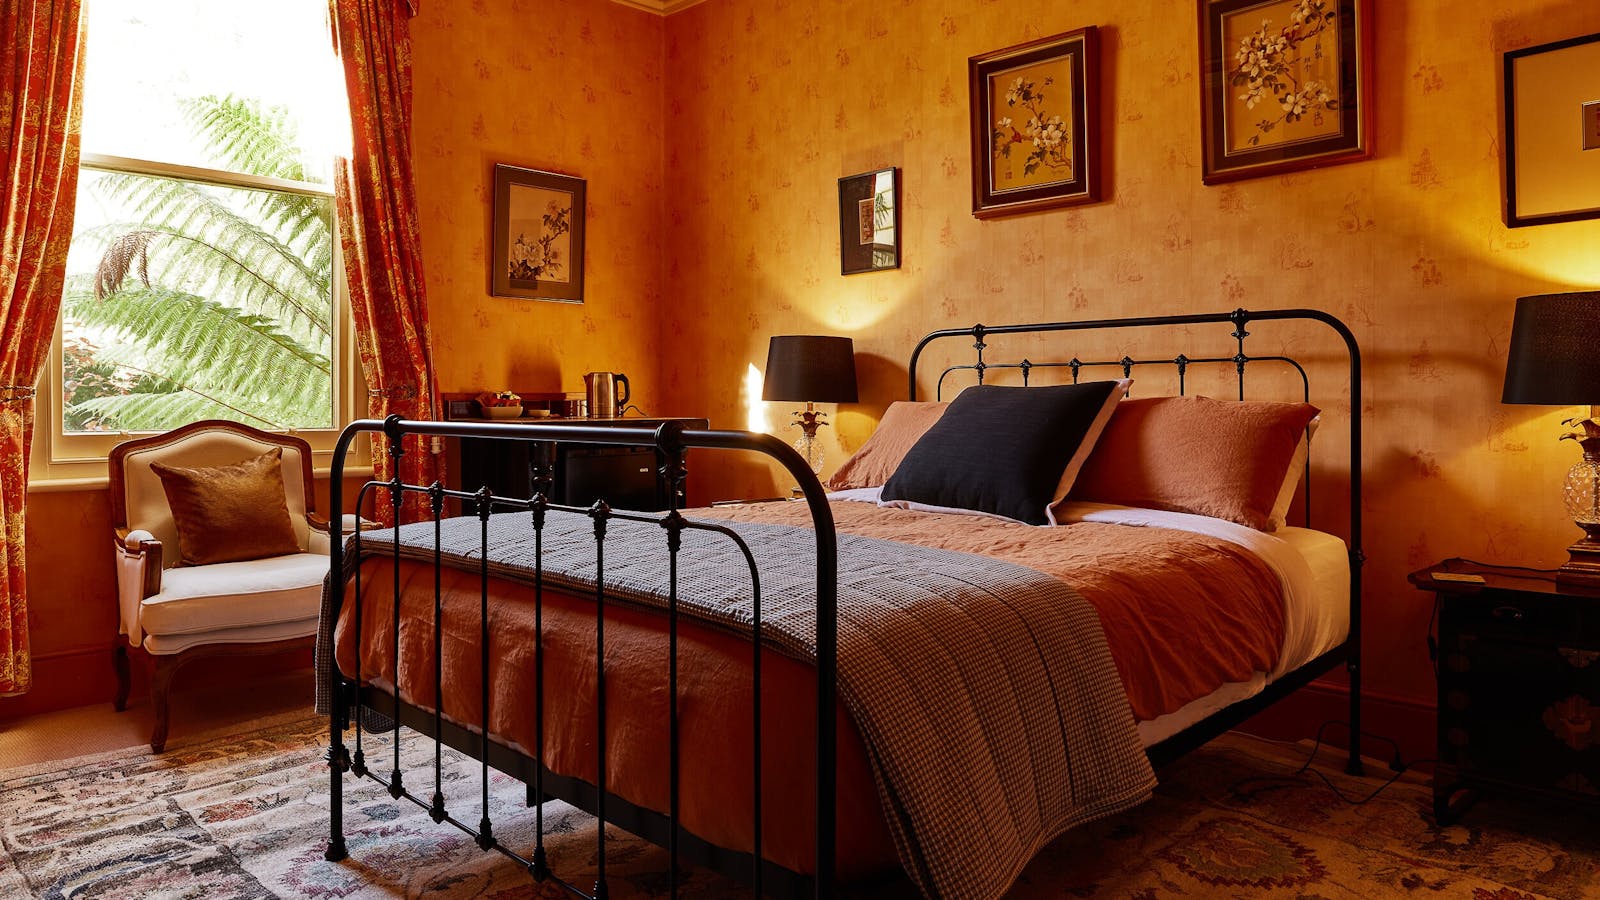 The Pippin Room welcomes you with warm, inviting colours, period features and modern comforts.